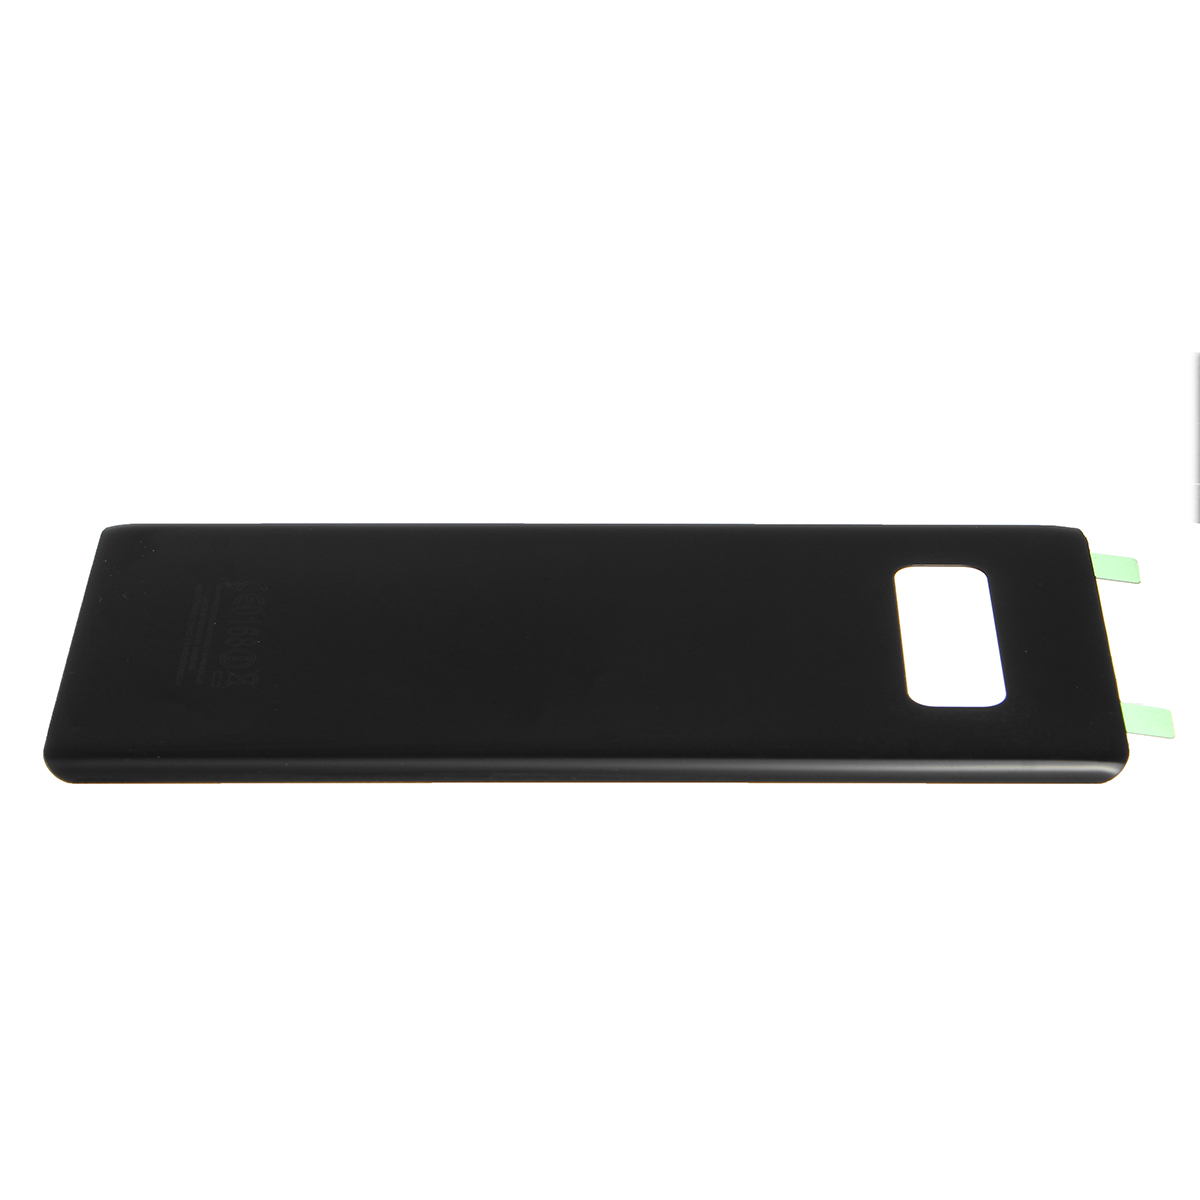 Back-Glass-Battery-Cover-With-Camera-Lens-Frame-for-Samsung-Galaxy-Note-8-1330642-7